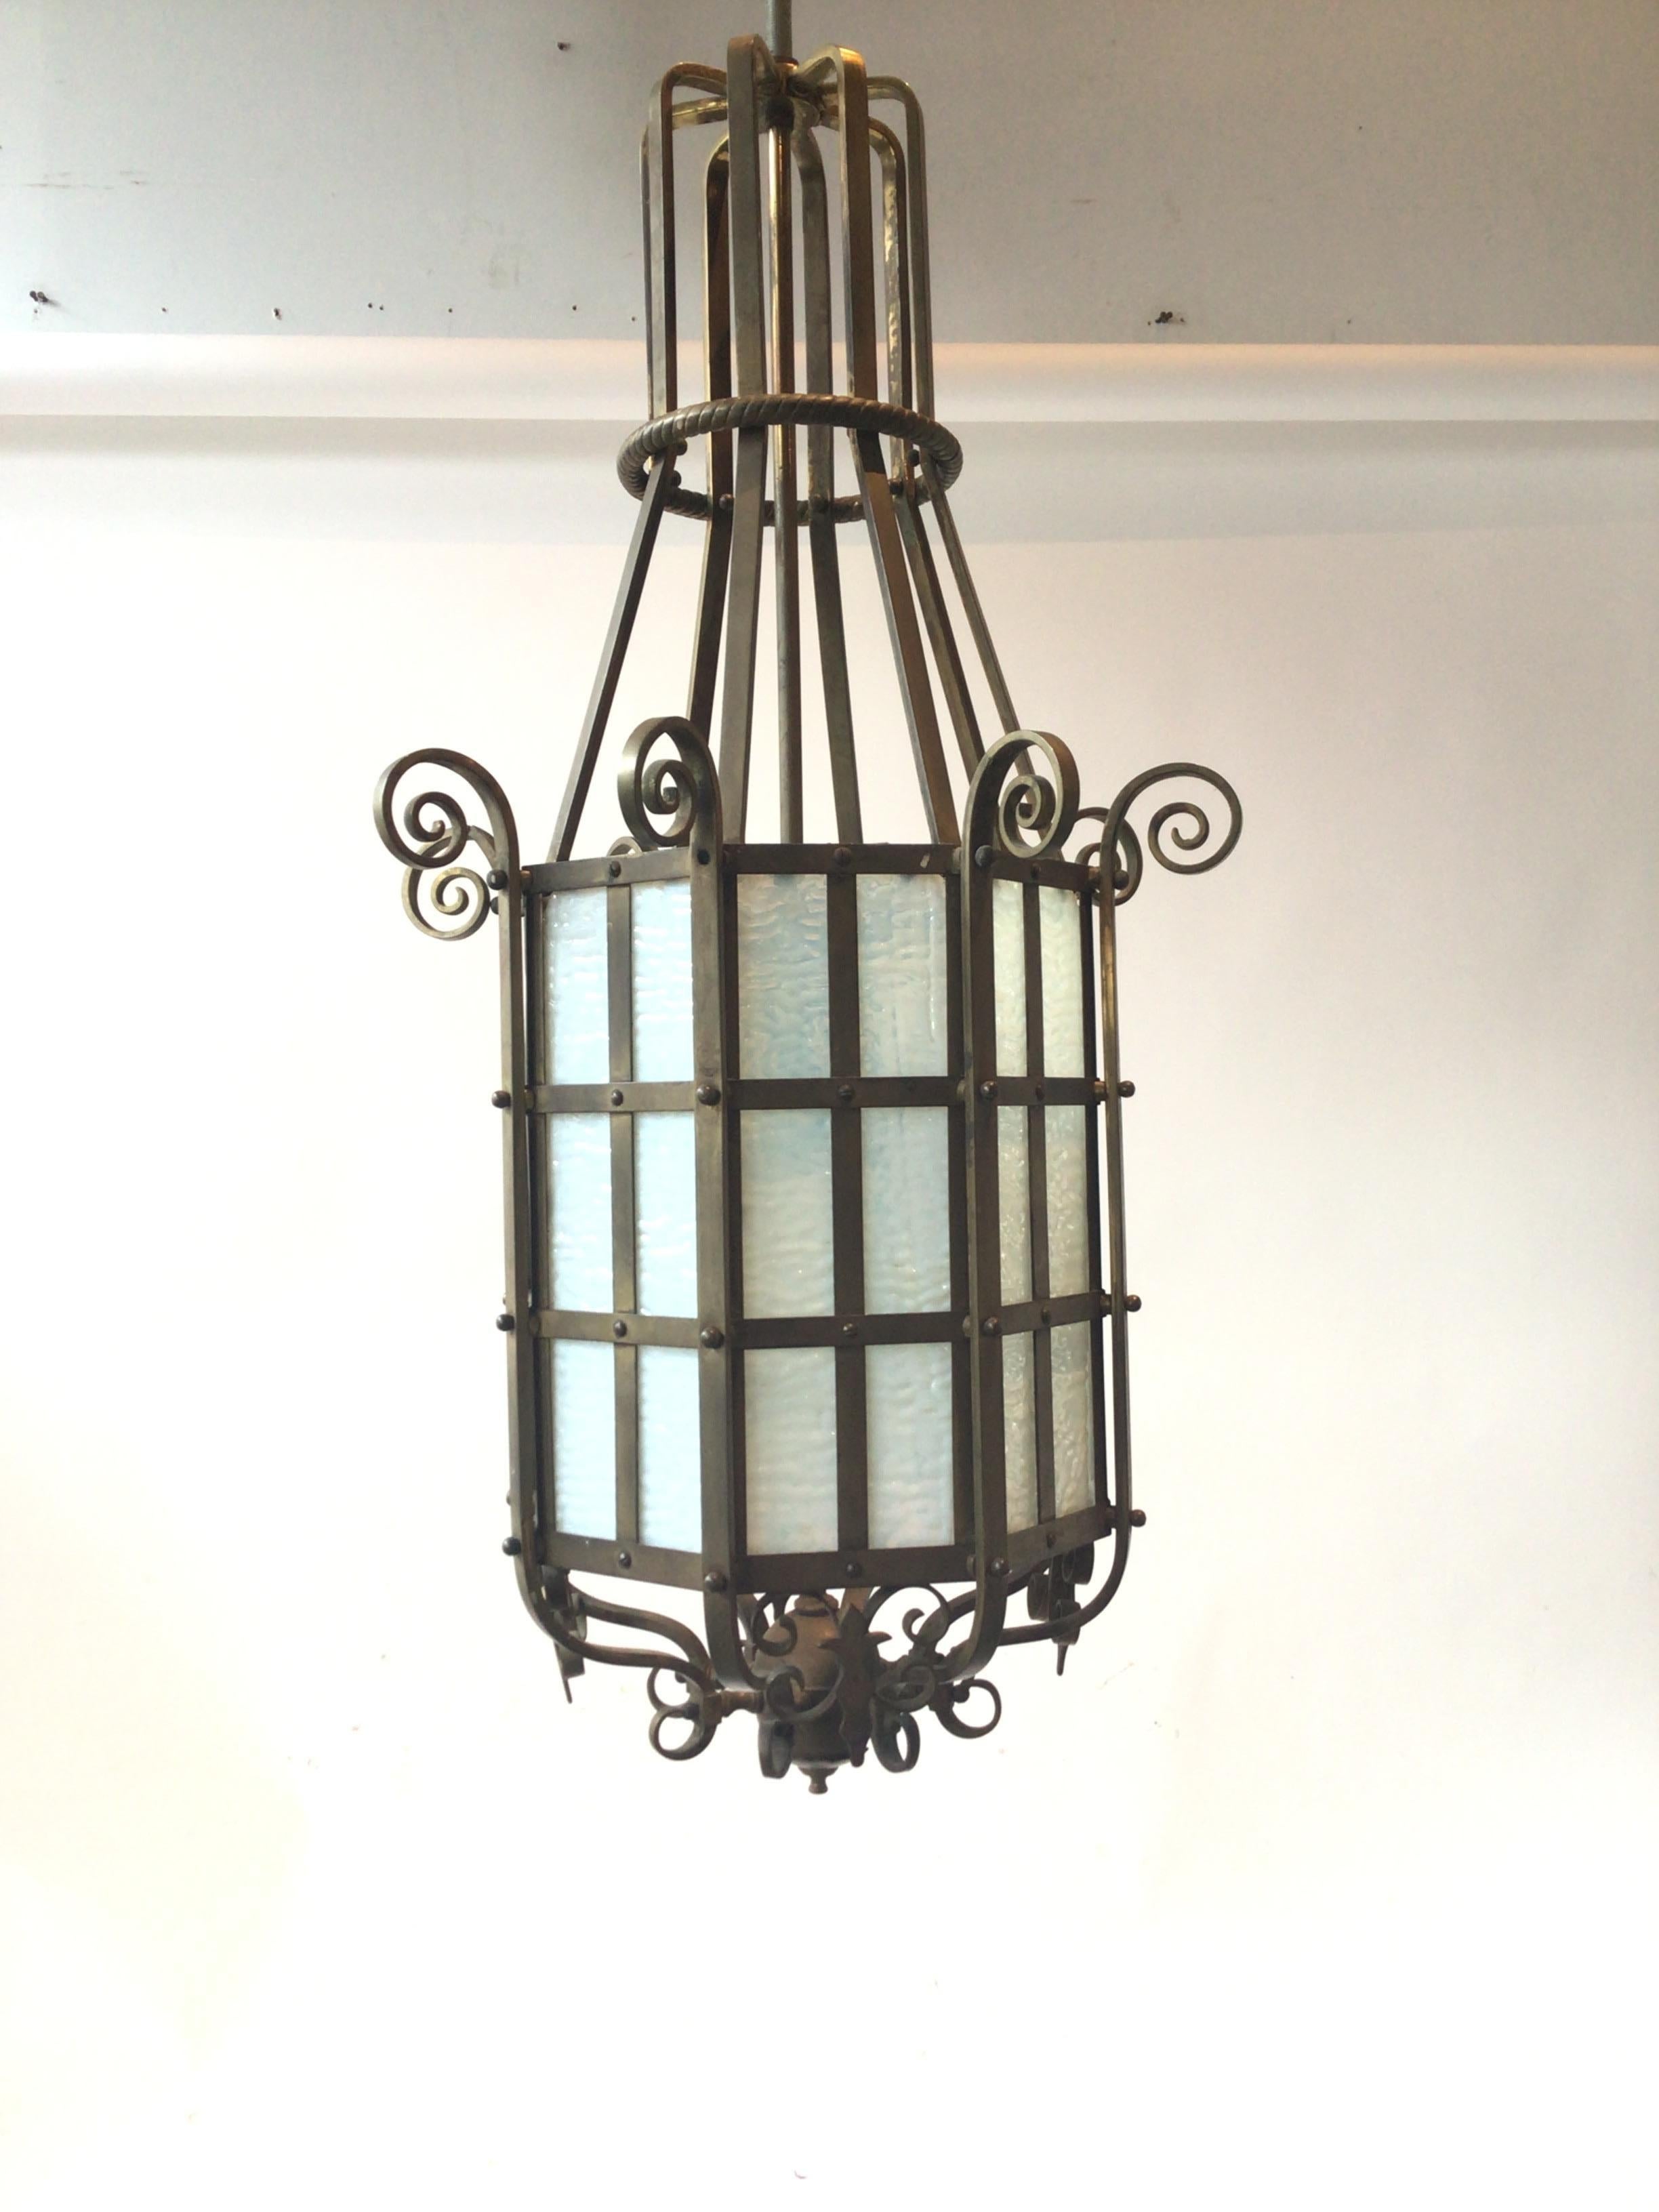 1920s Bronze and slate glass lantern. Was rewired about 10 years ago, needs rewiring.